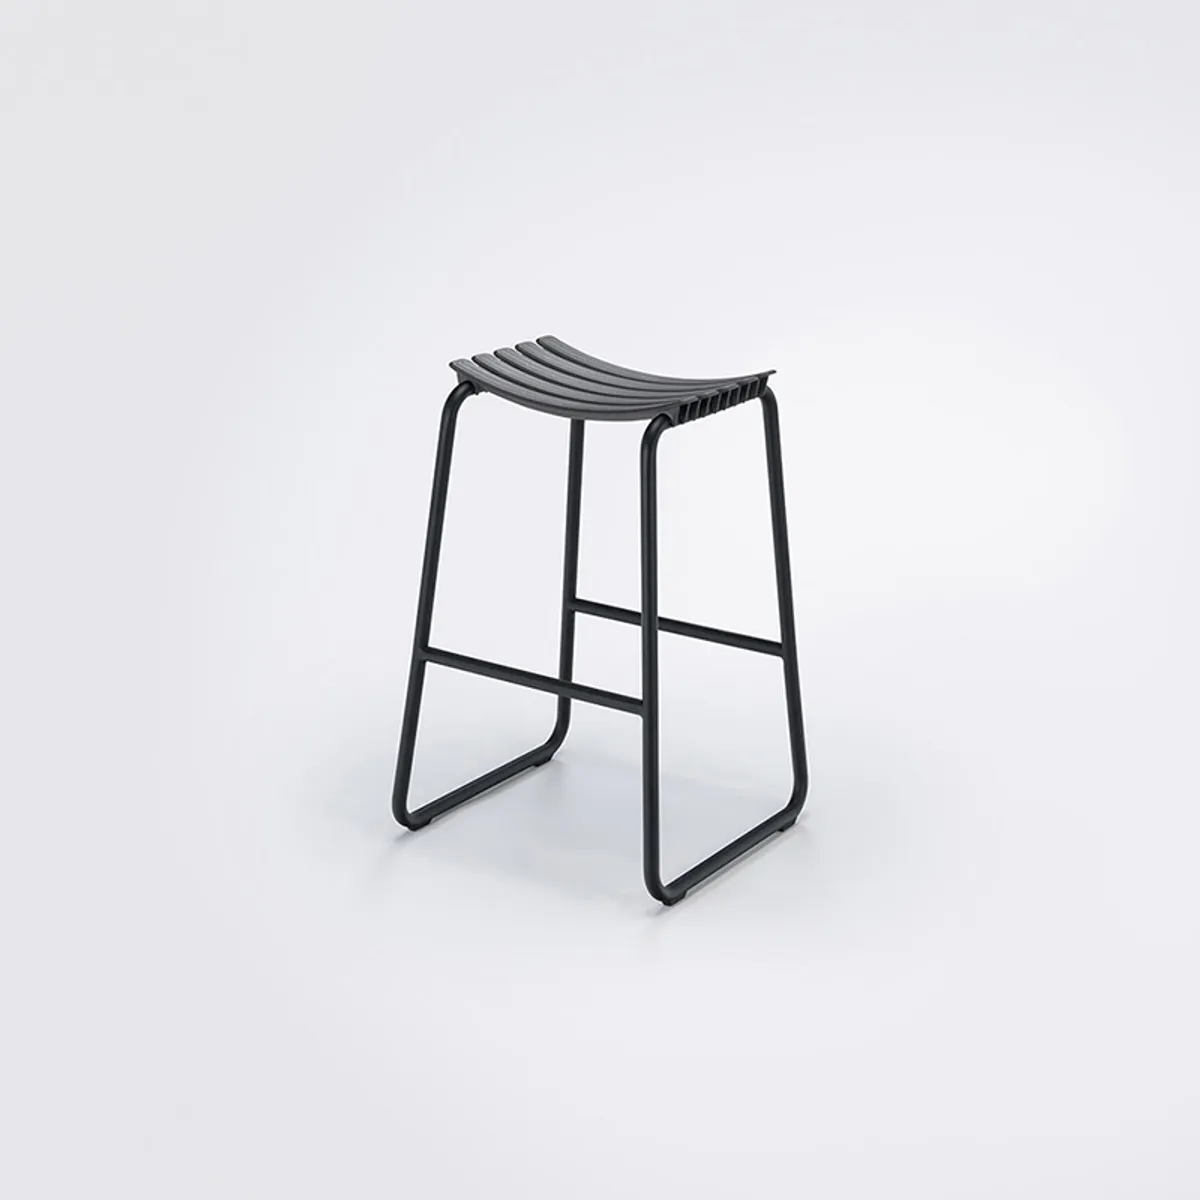 Snip Stool Outdoor Metal And Plastic Furniture For Hotels And Cafes 039